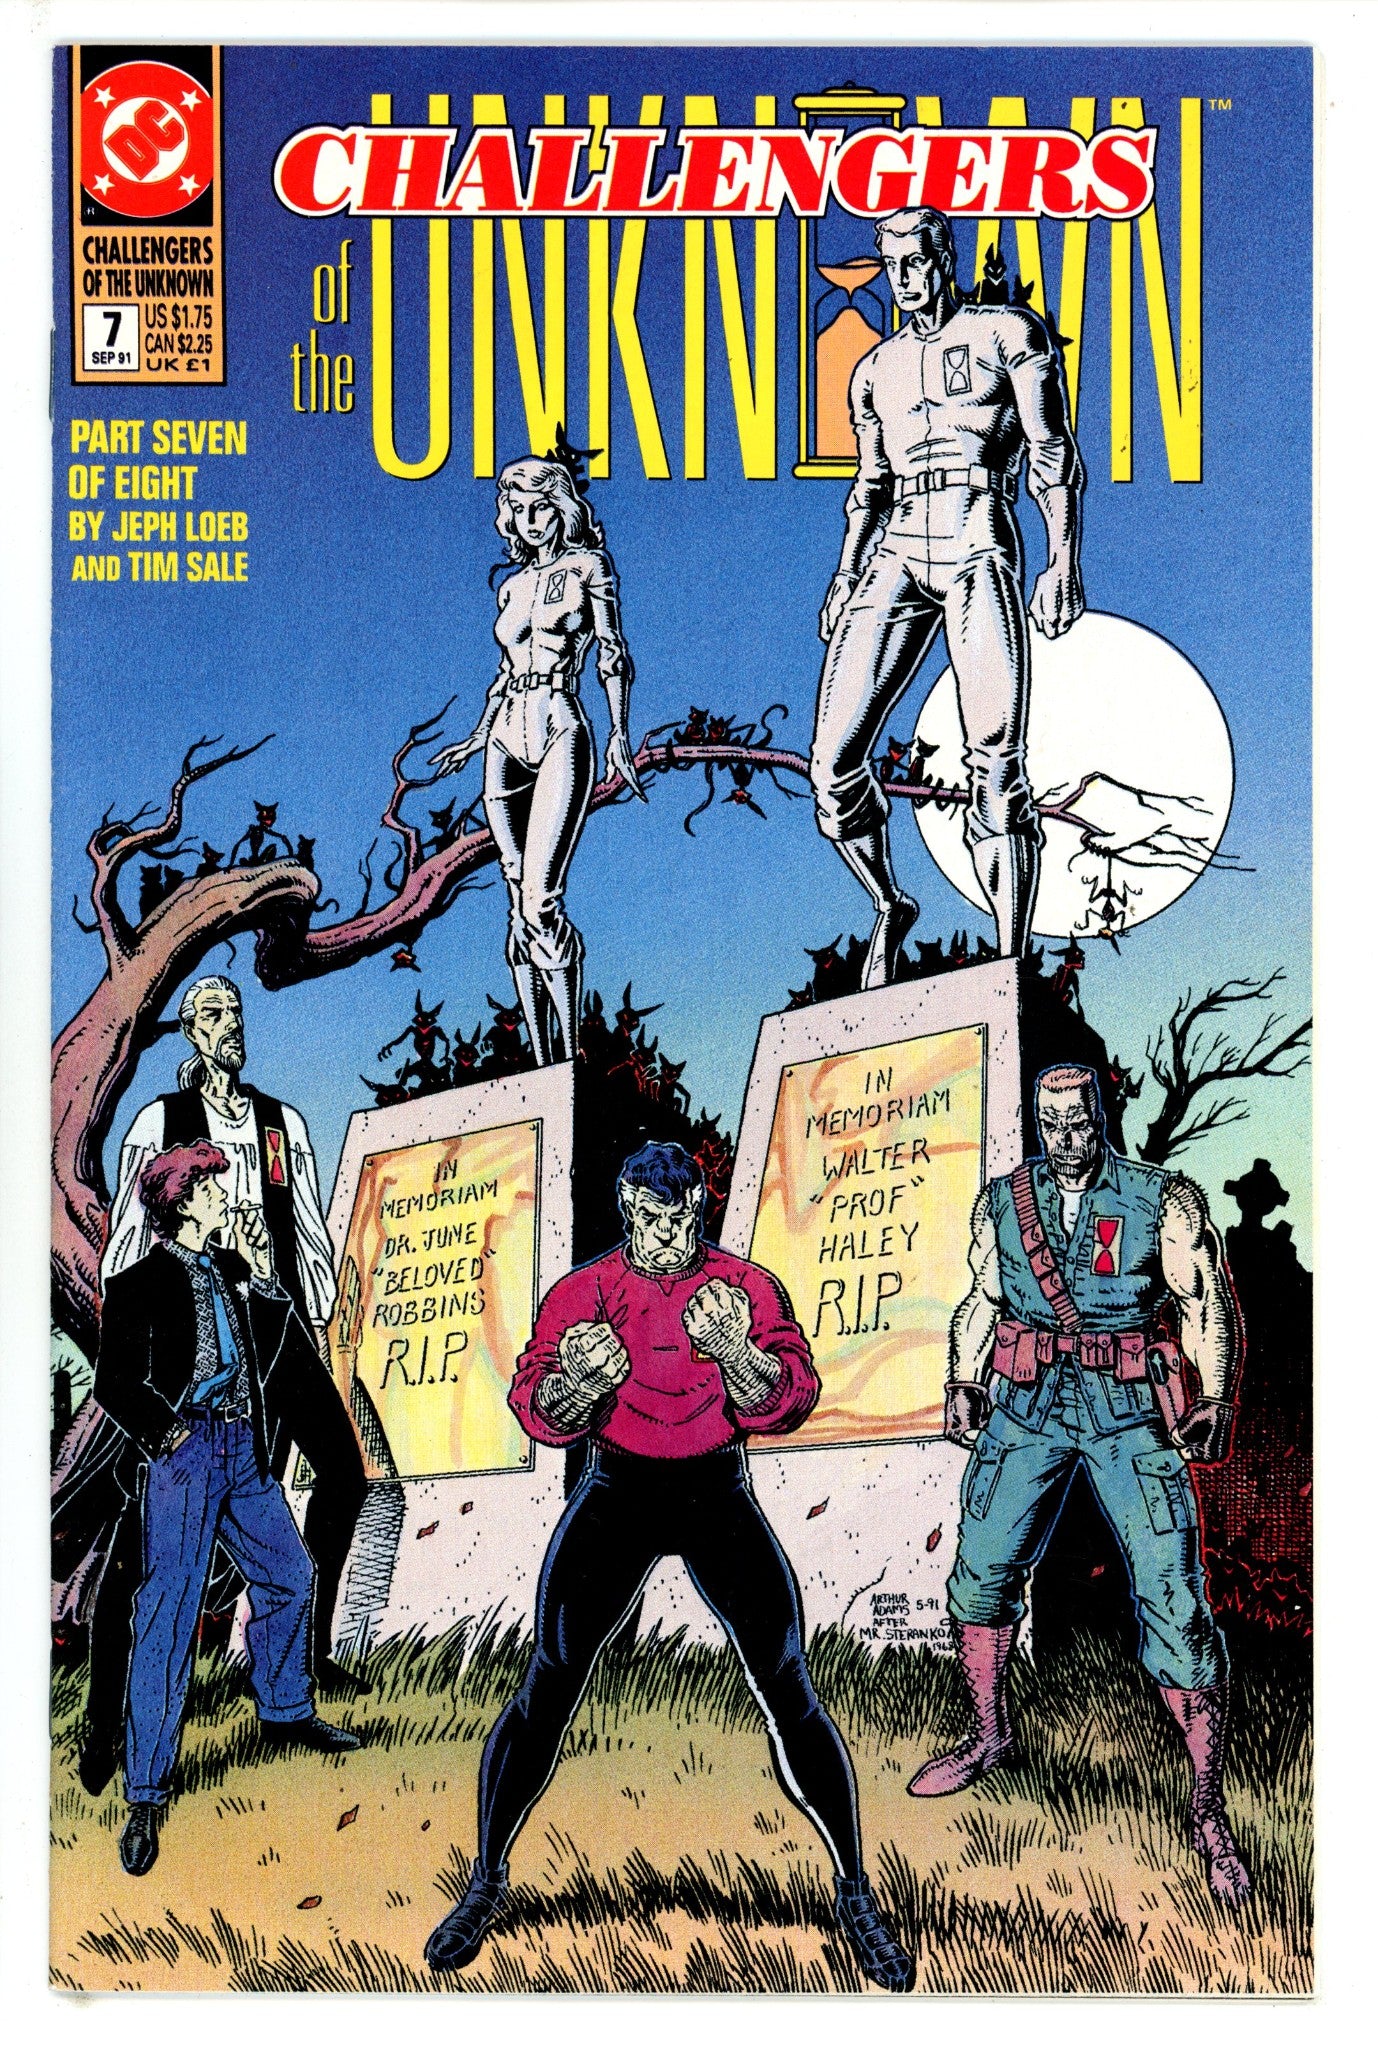 Challengers of the Unknown Vol 2 7 (1991)